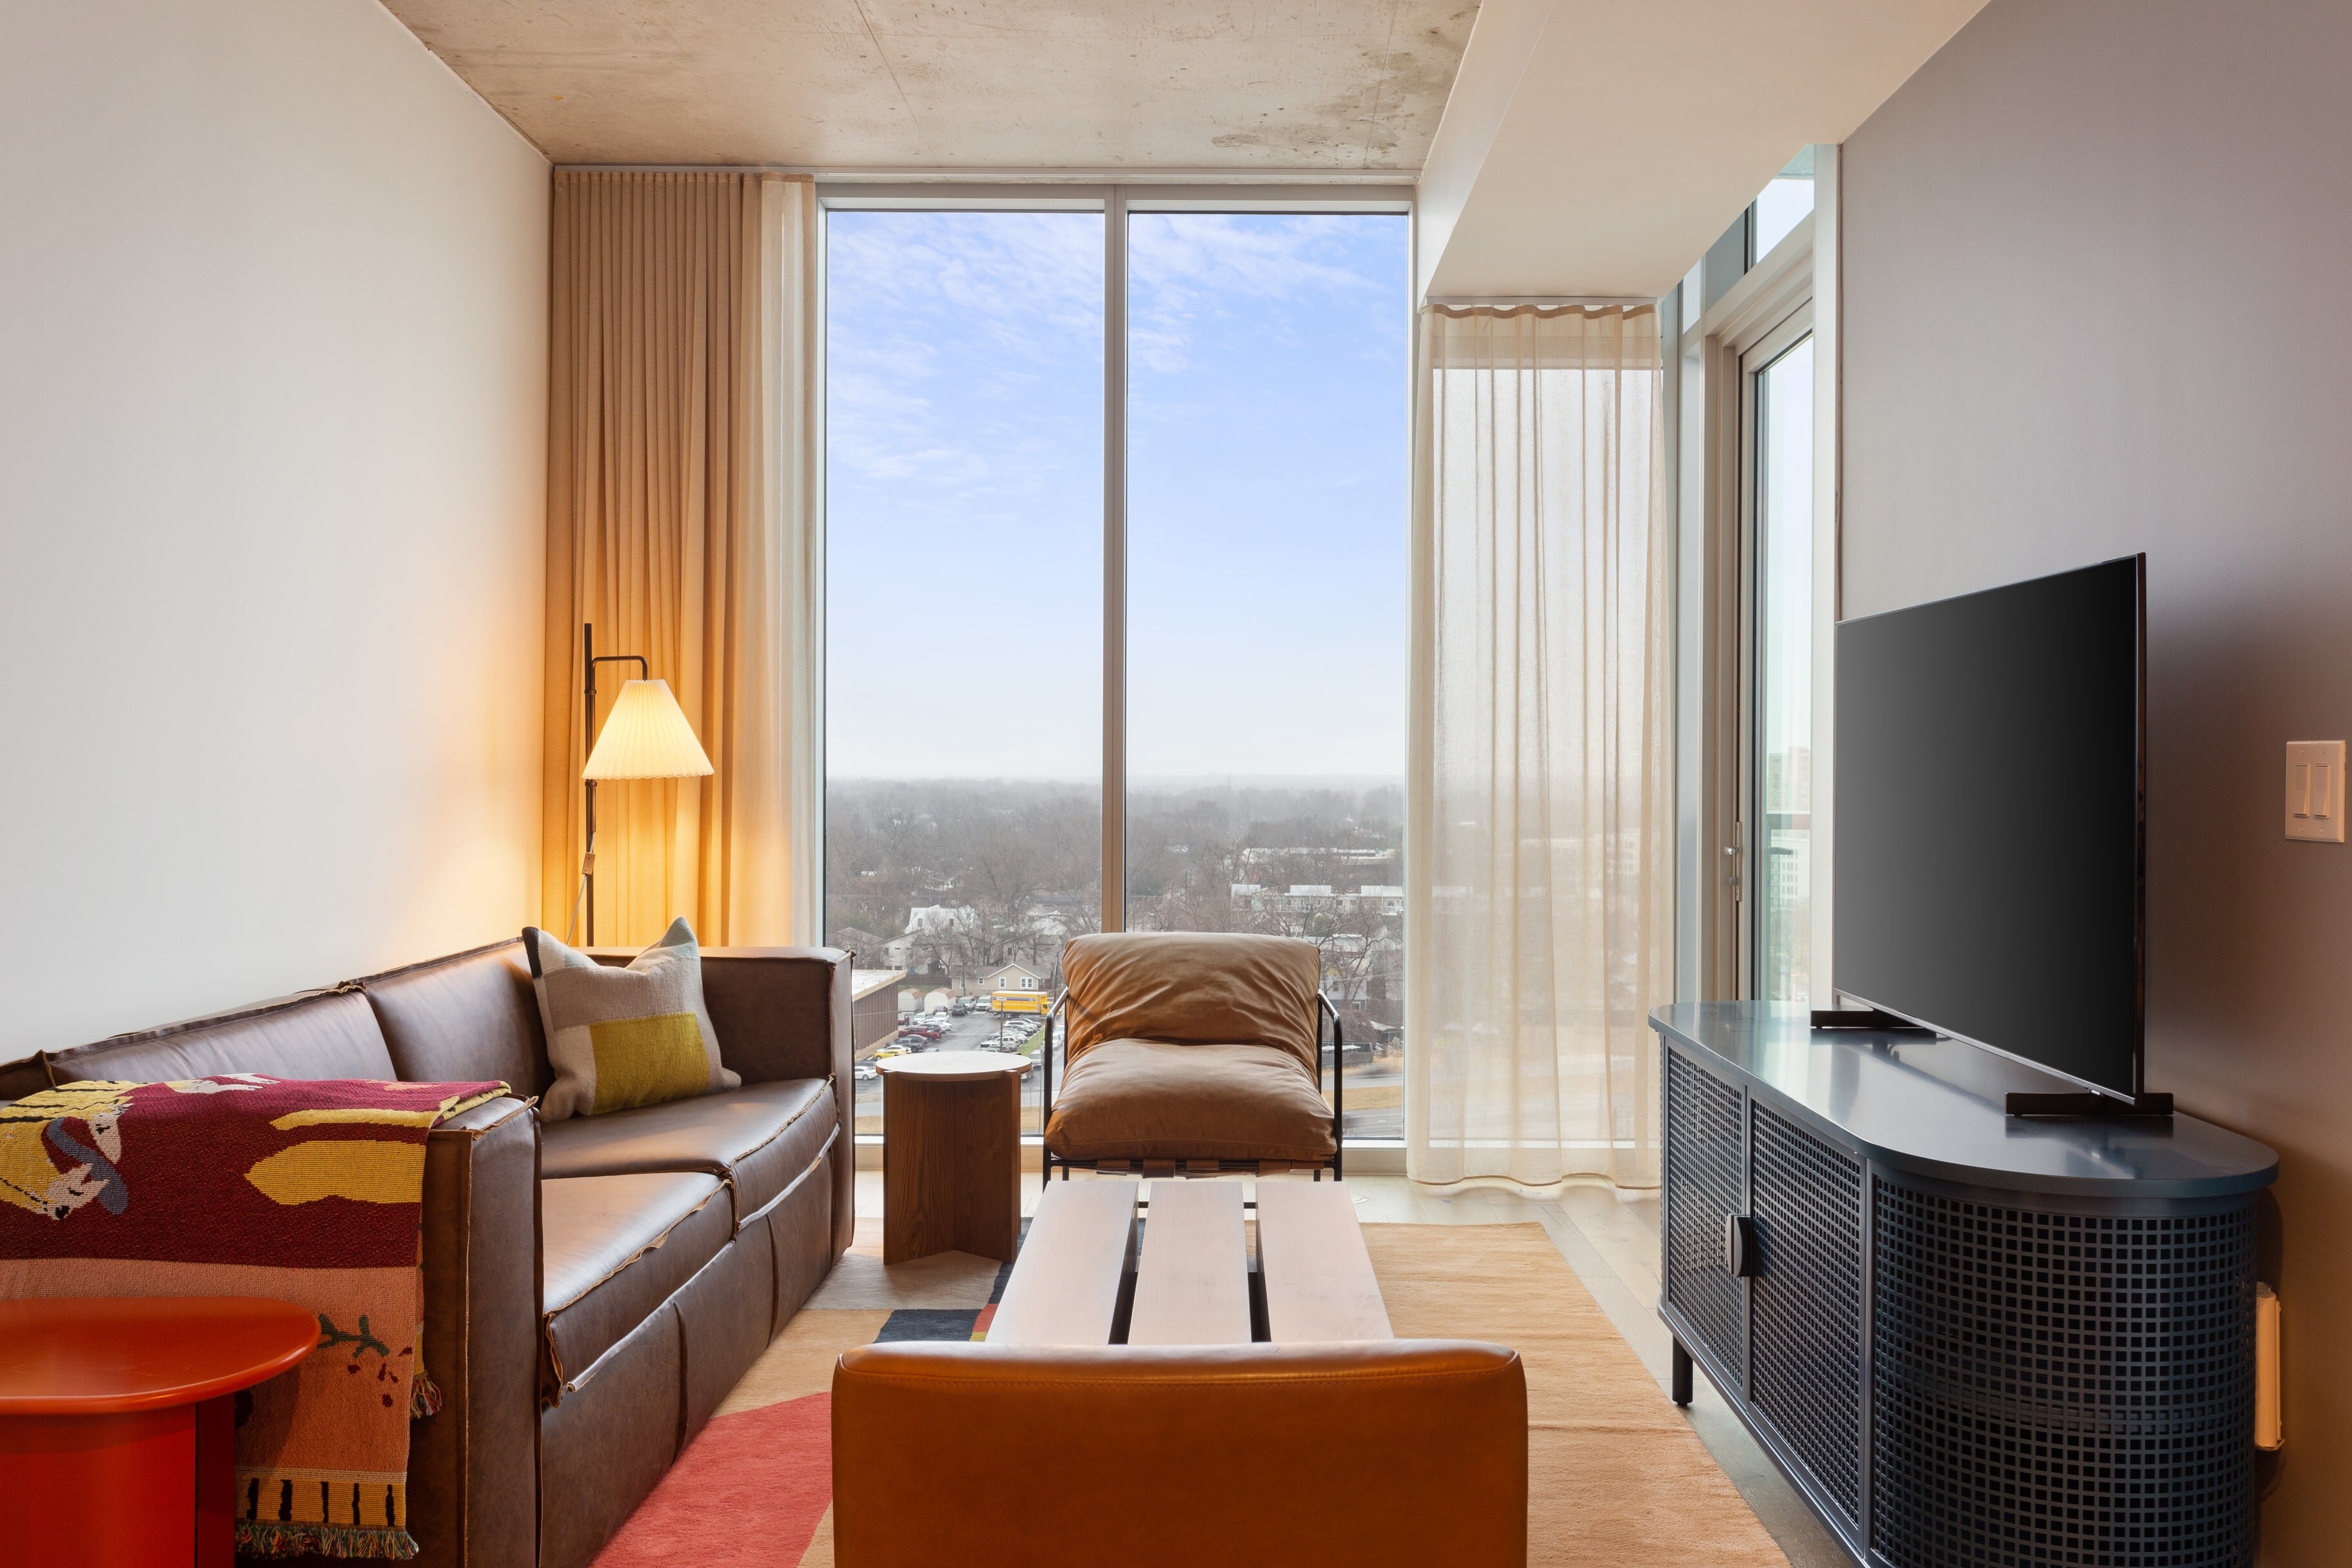 Living room features a contemporary style and floor to ceiling windows for incredible views of Austin.